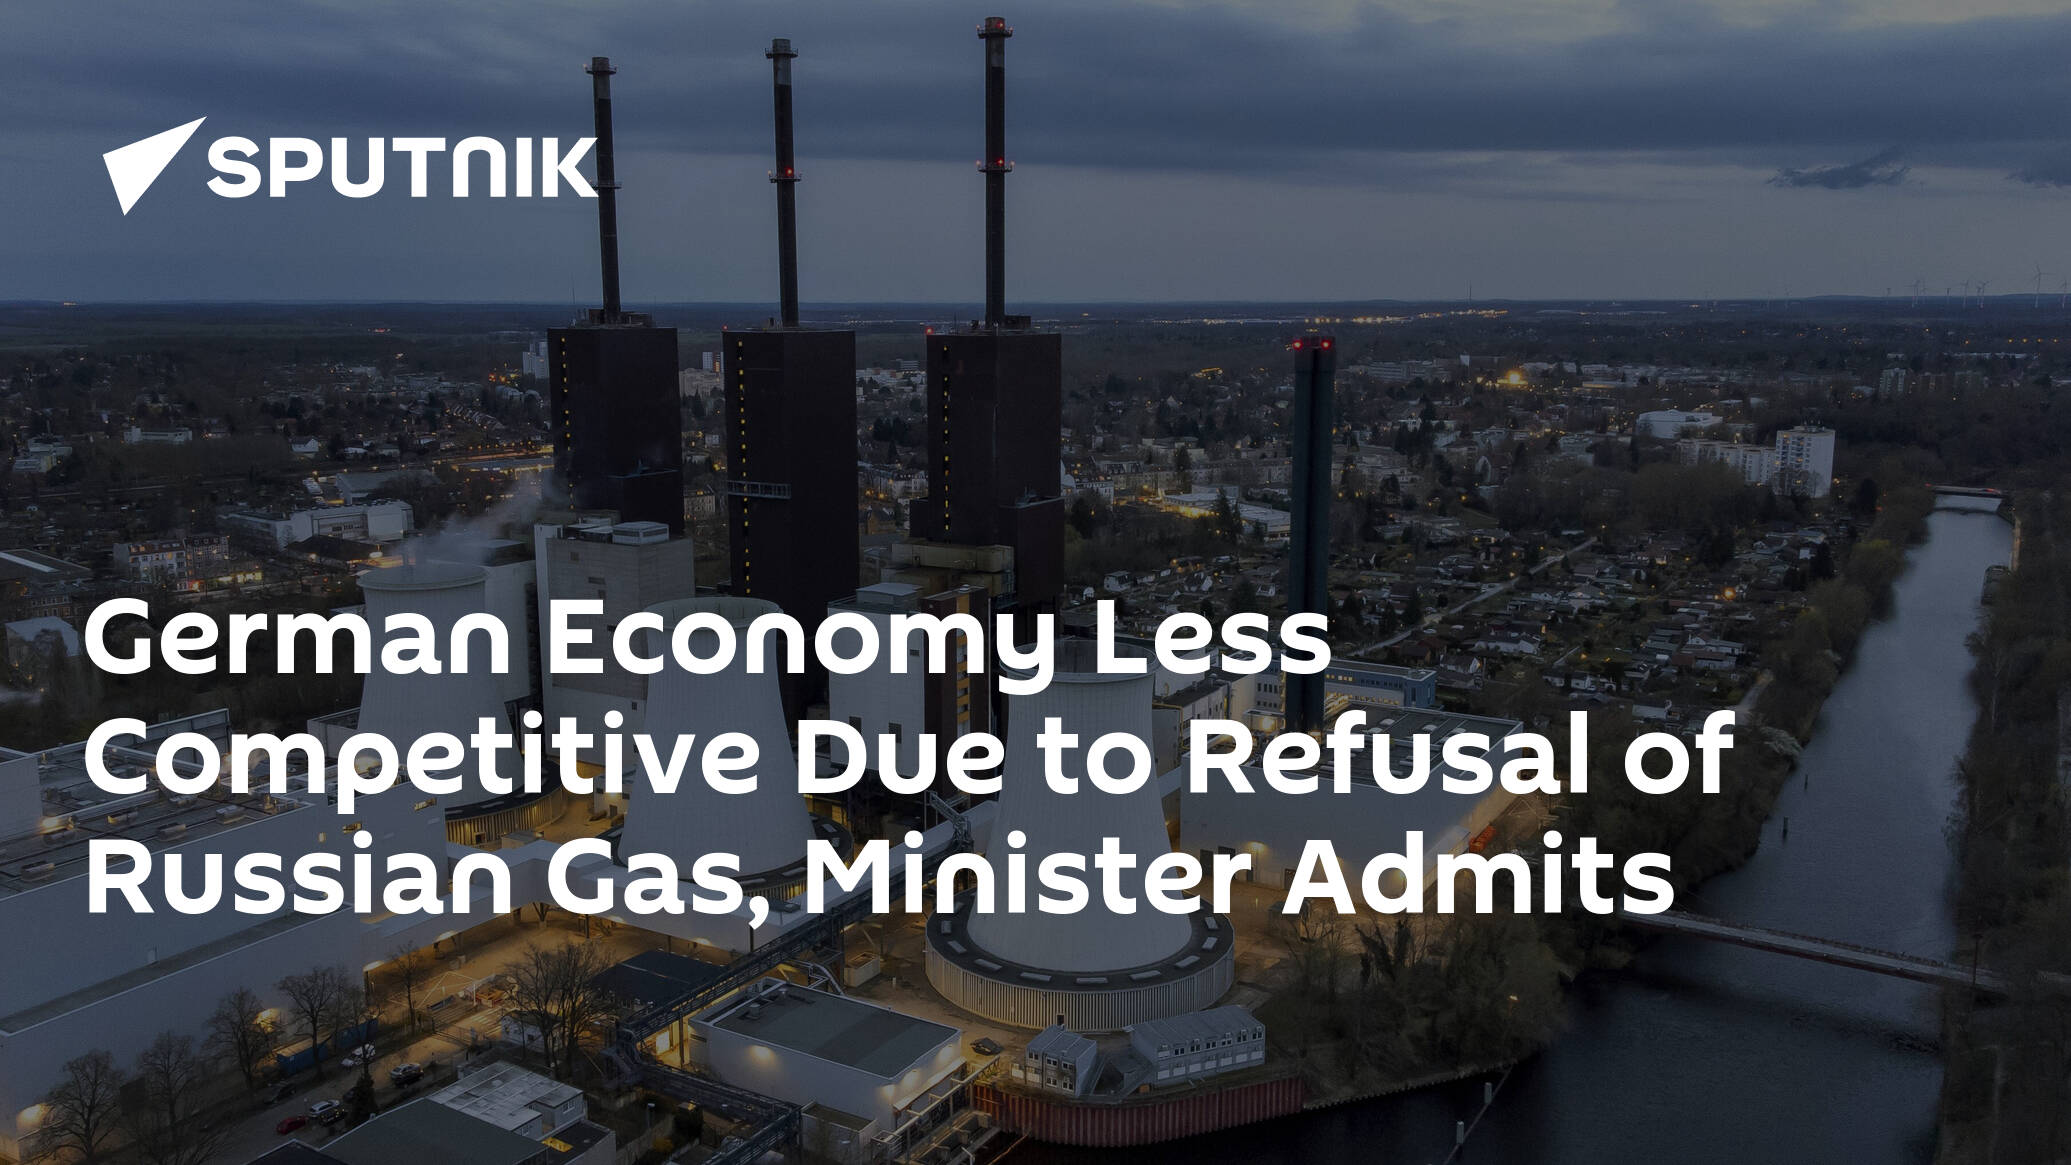 German Economy Less Competitive Due to Refusal of Russian Gas, Minister Admits